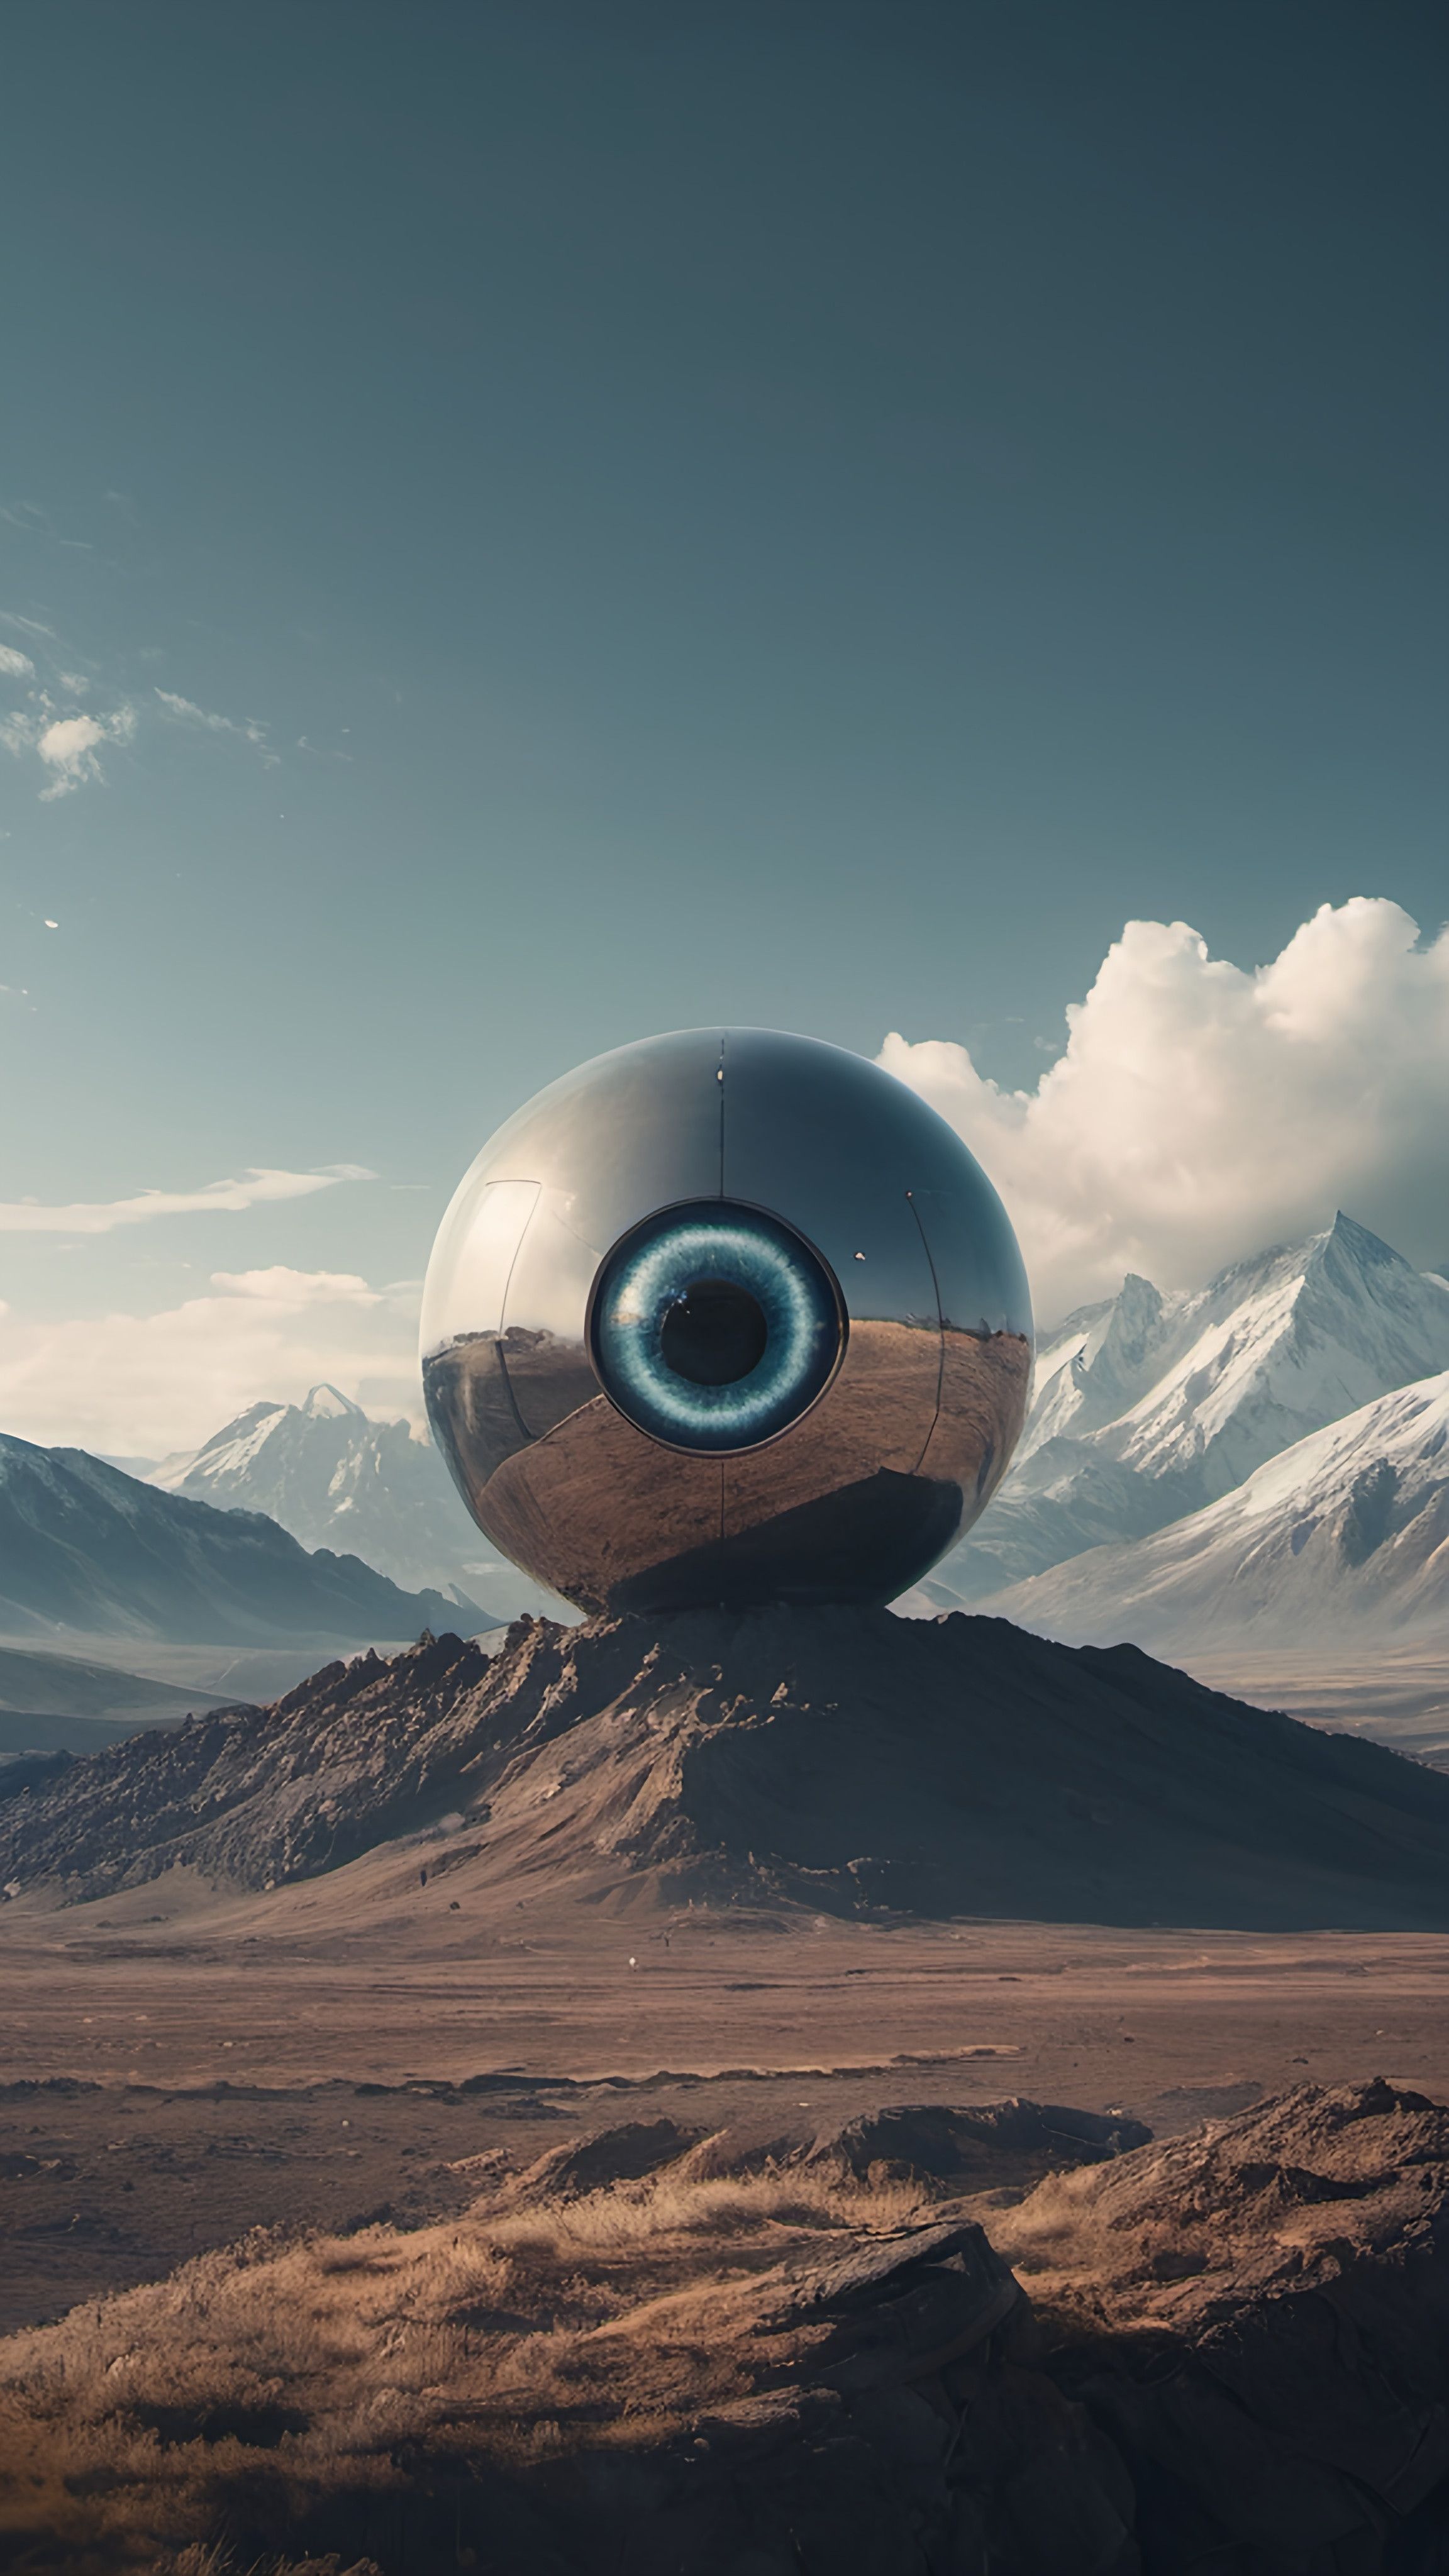 Prompt: a futuristic looking object with a large eye on top of it in the middle of a desert landscape with mountains